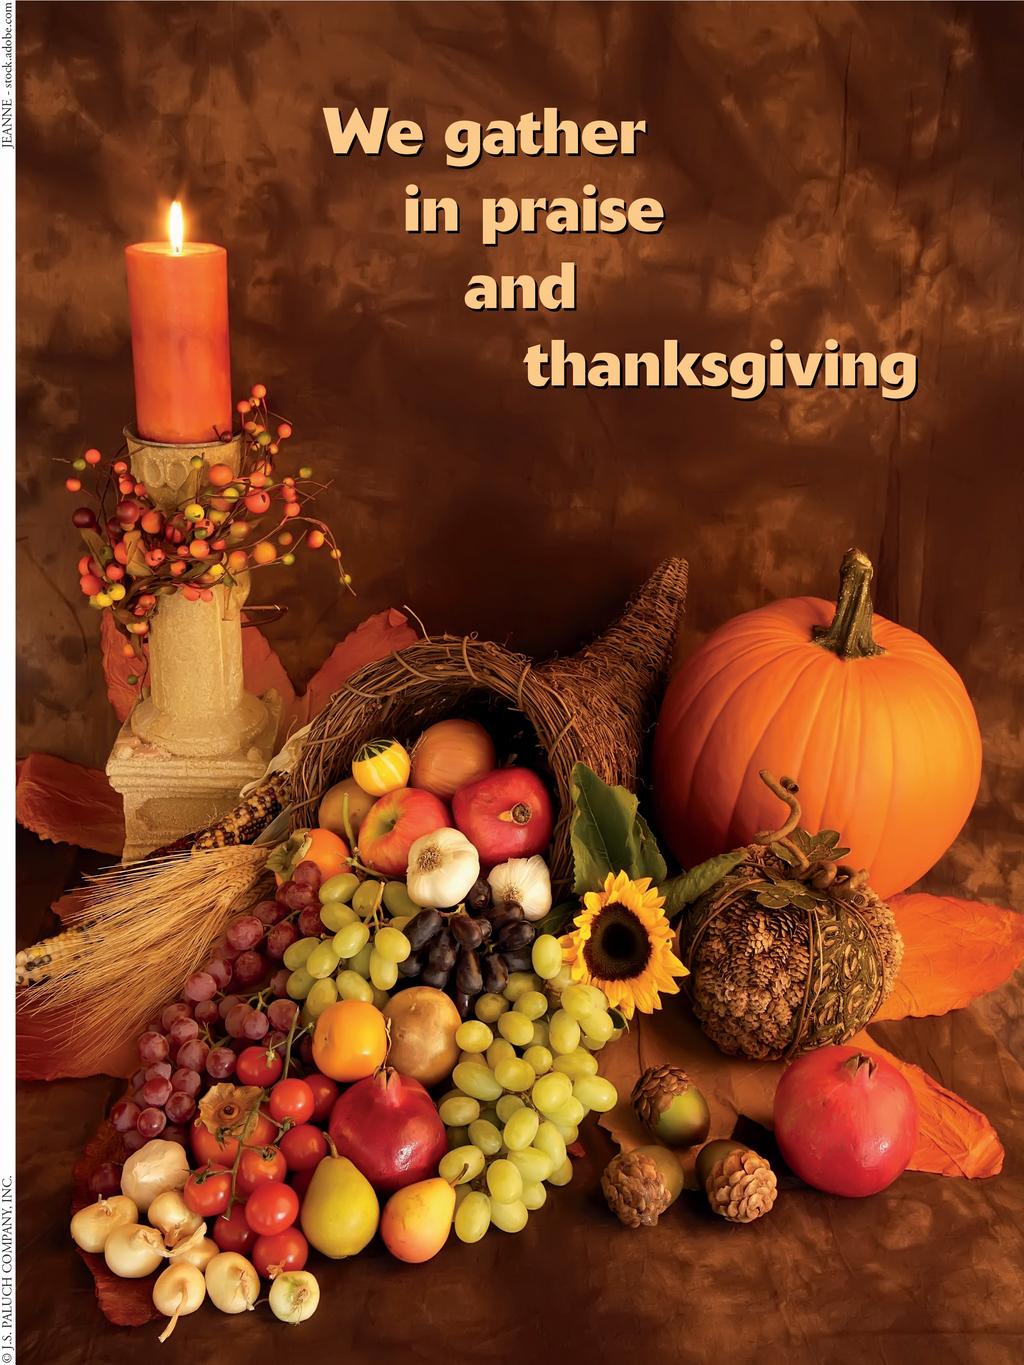 Join us for Thanksgiving Day Mass at 9:00 am in the Church The Adoration Chapel will be closed on Thursday, November 22.